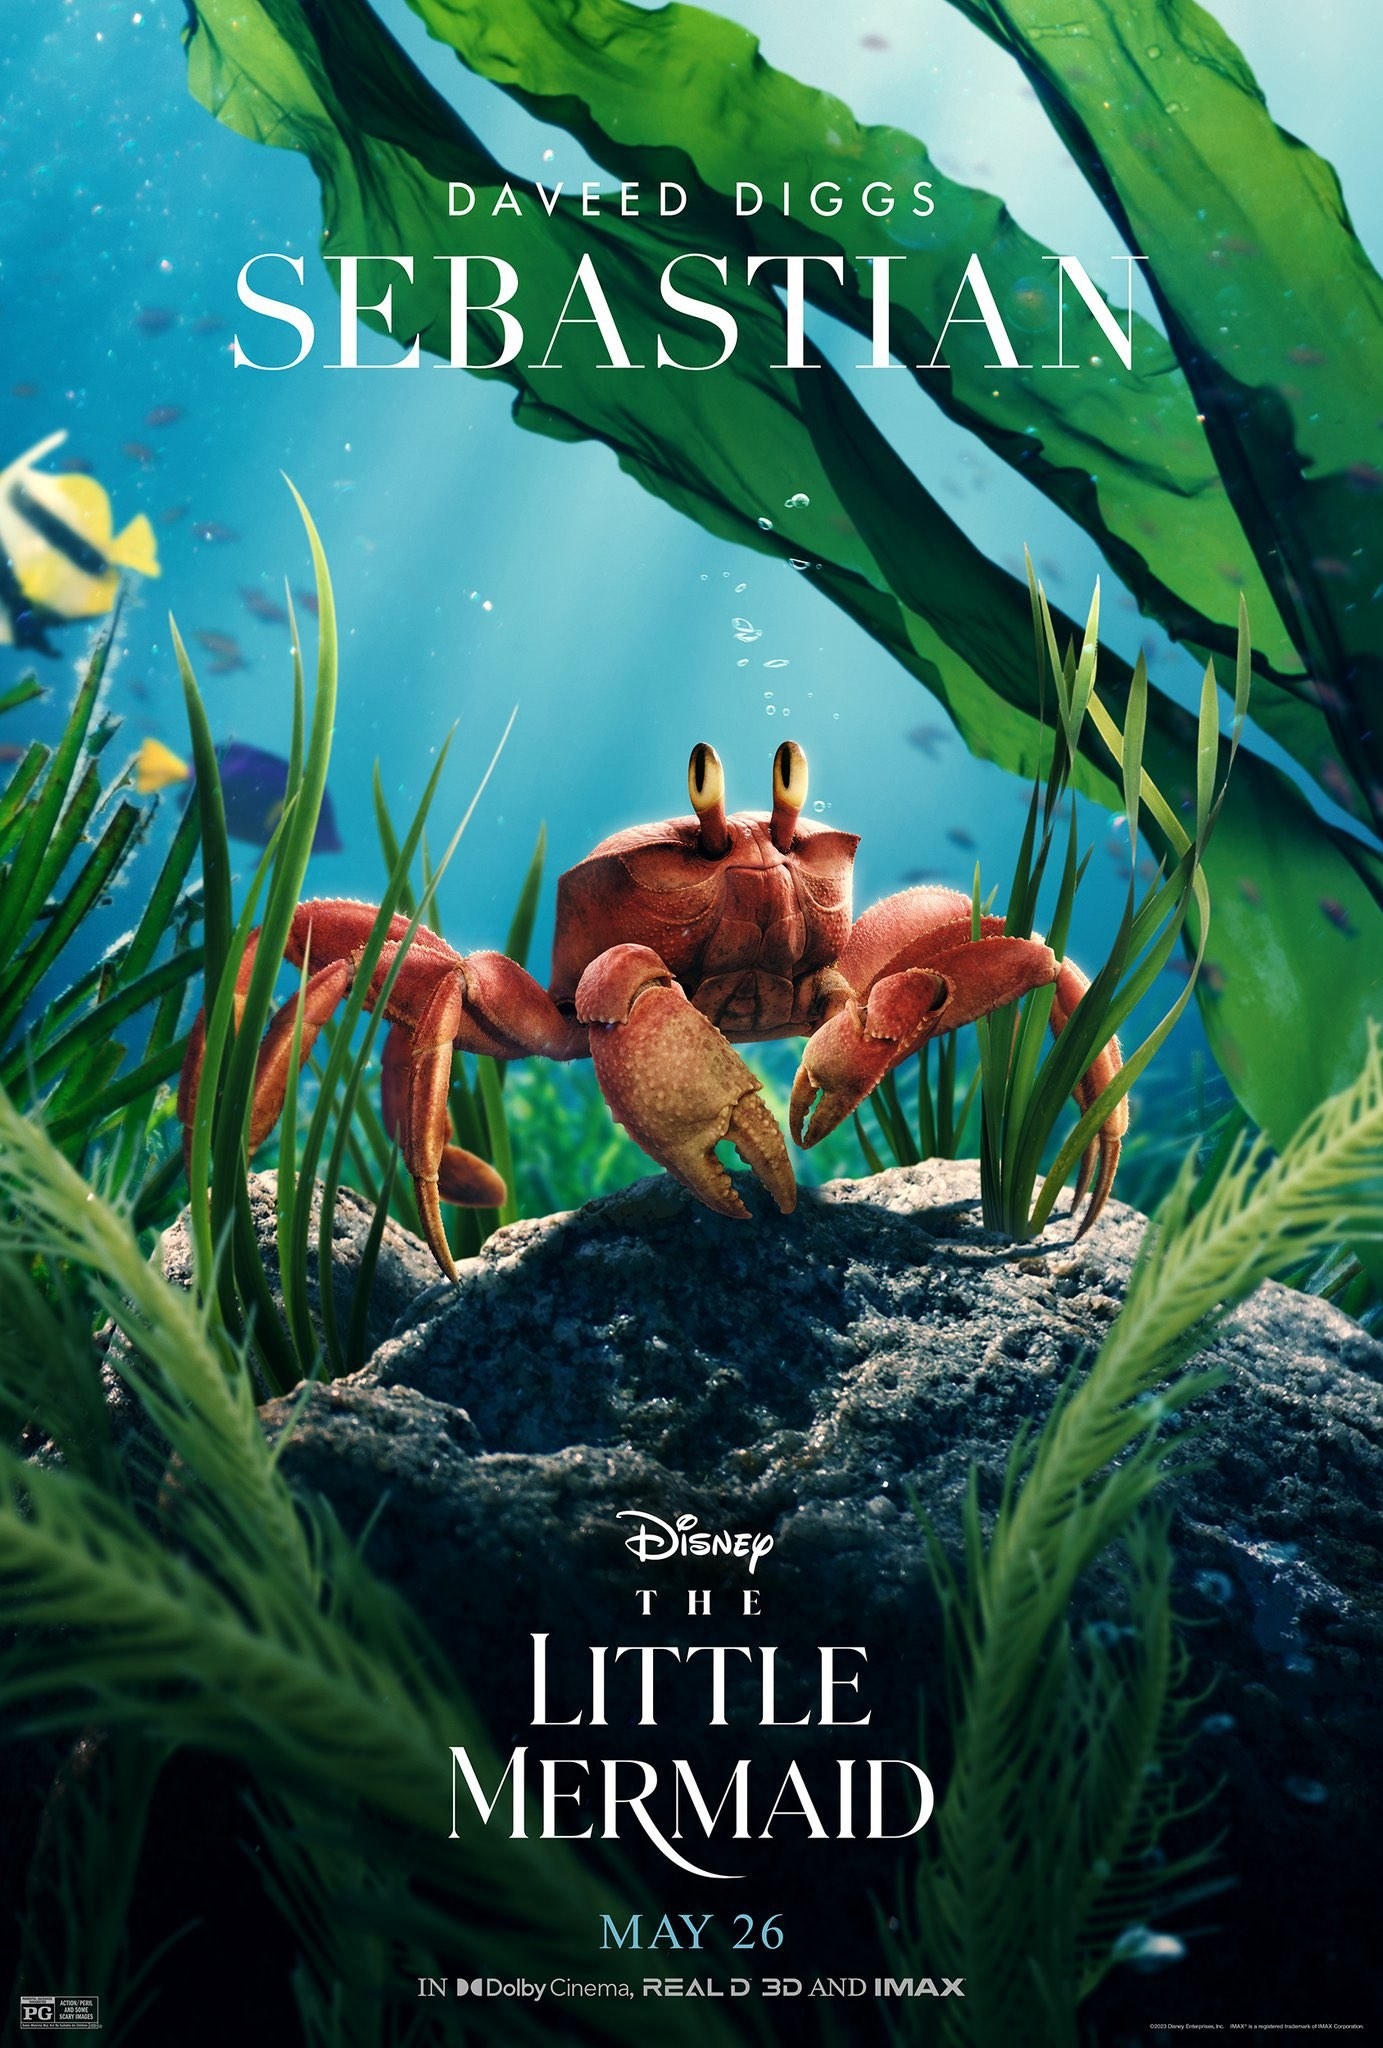 Sebastian is a very realistic crab now